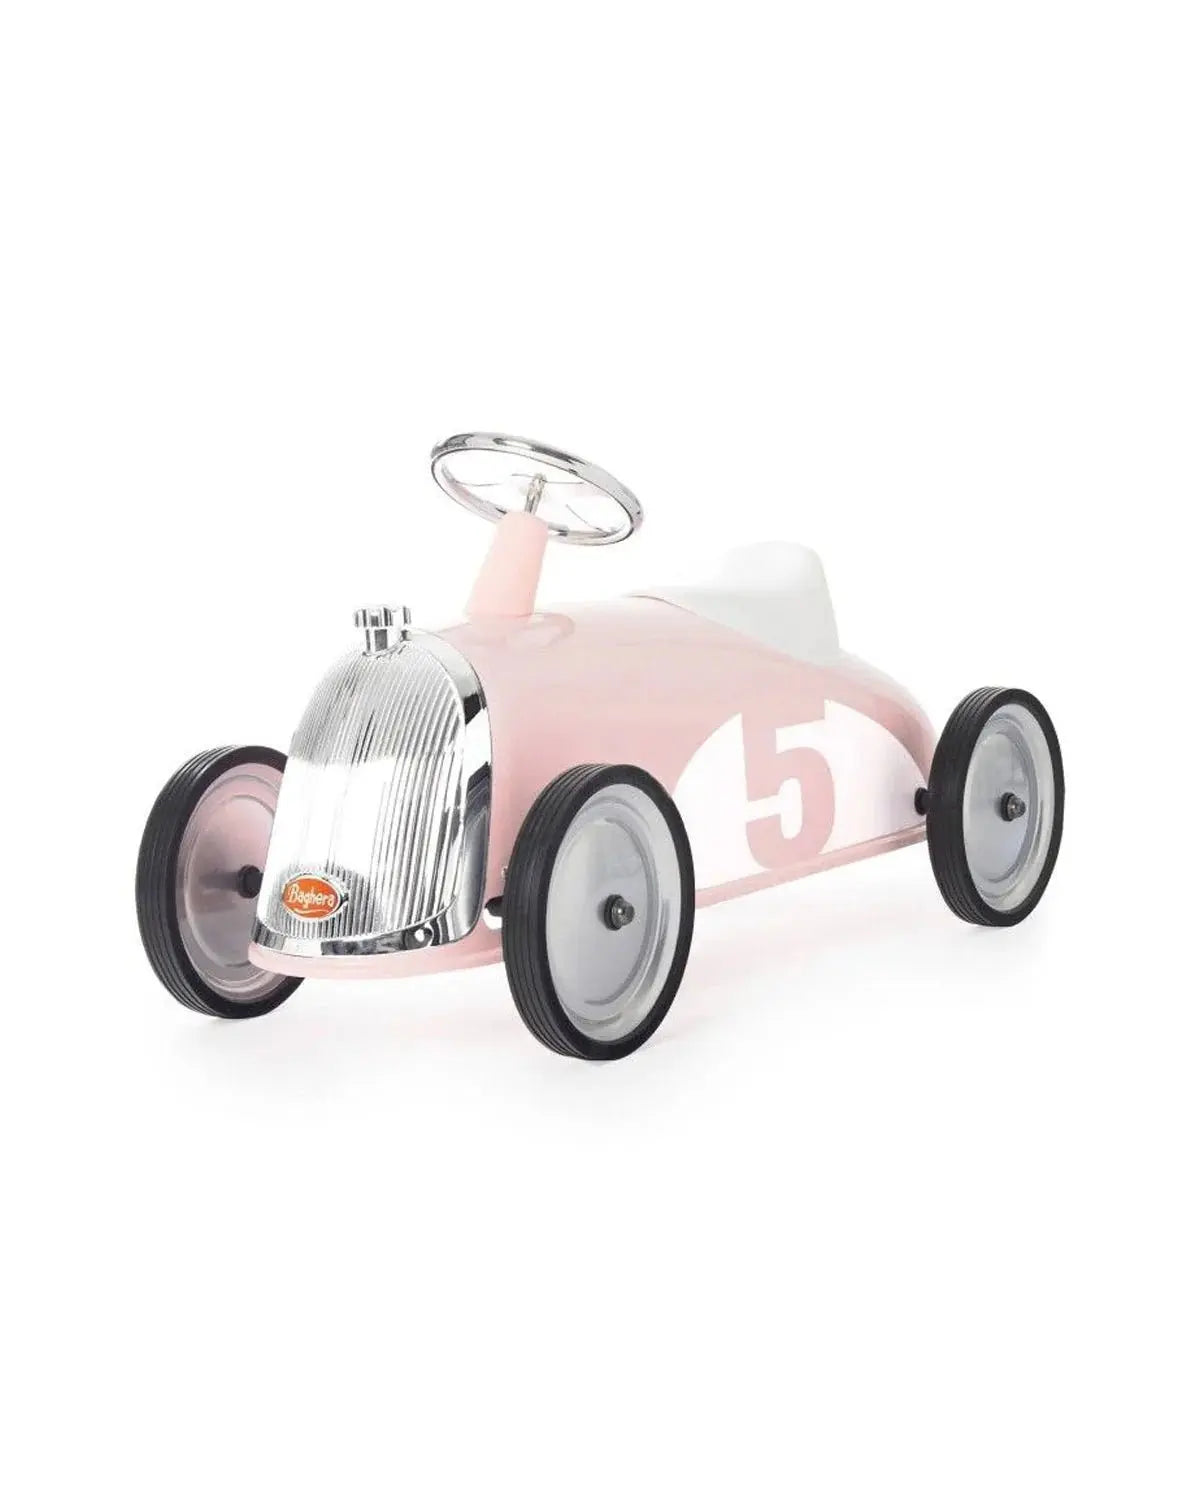 Ride-on Rider Toy Car, Durable Vintage Design, Classic Style, Kids Ride On, Retro Inspired  Baghera Petal Pink  